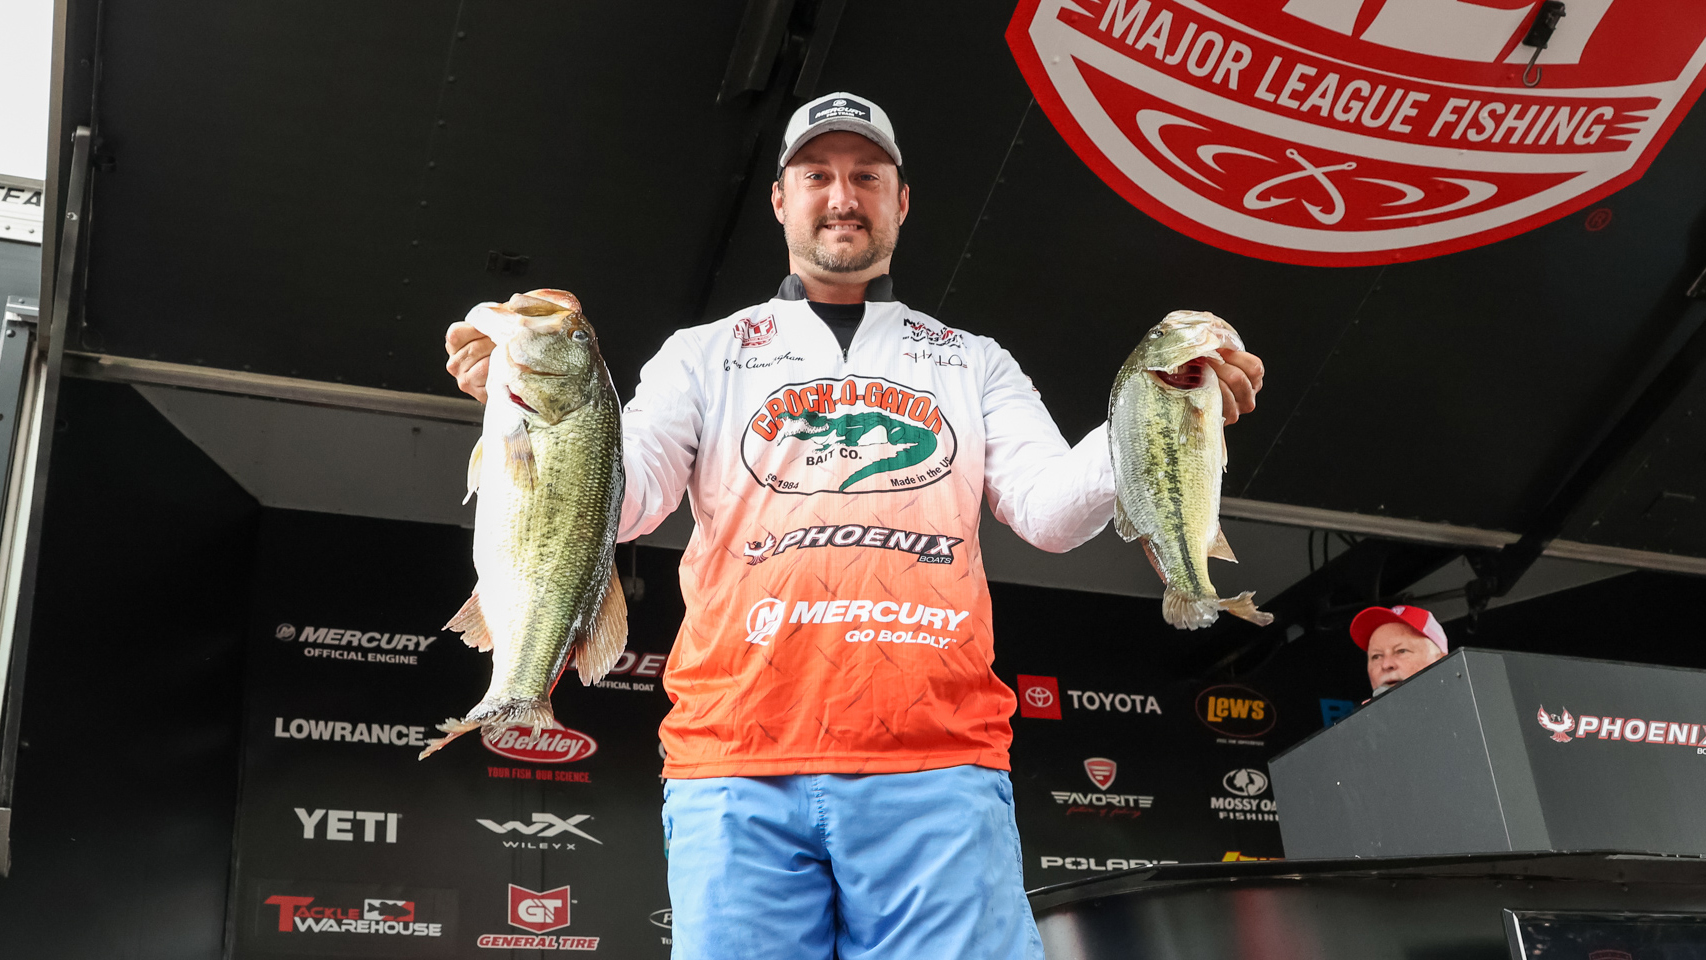 Missouri's Connor Cunningham Leads Day 1 of Phoenix Fishing League